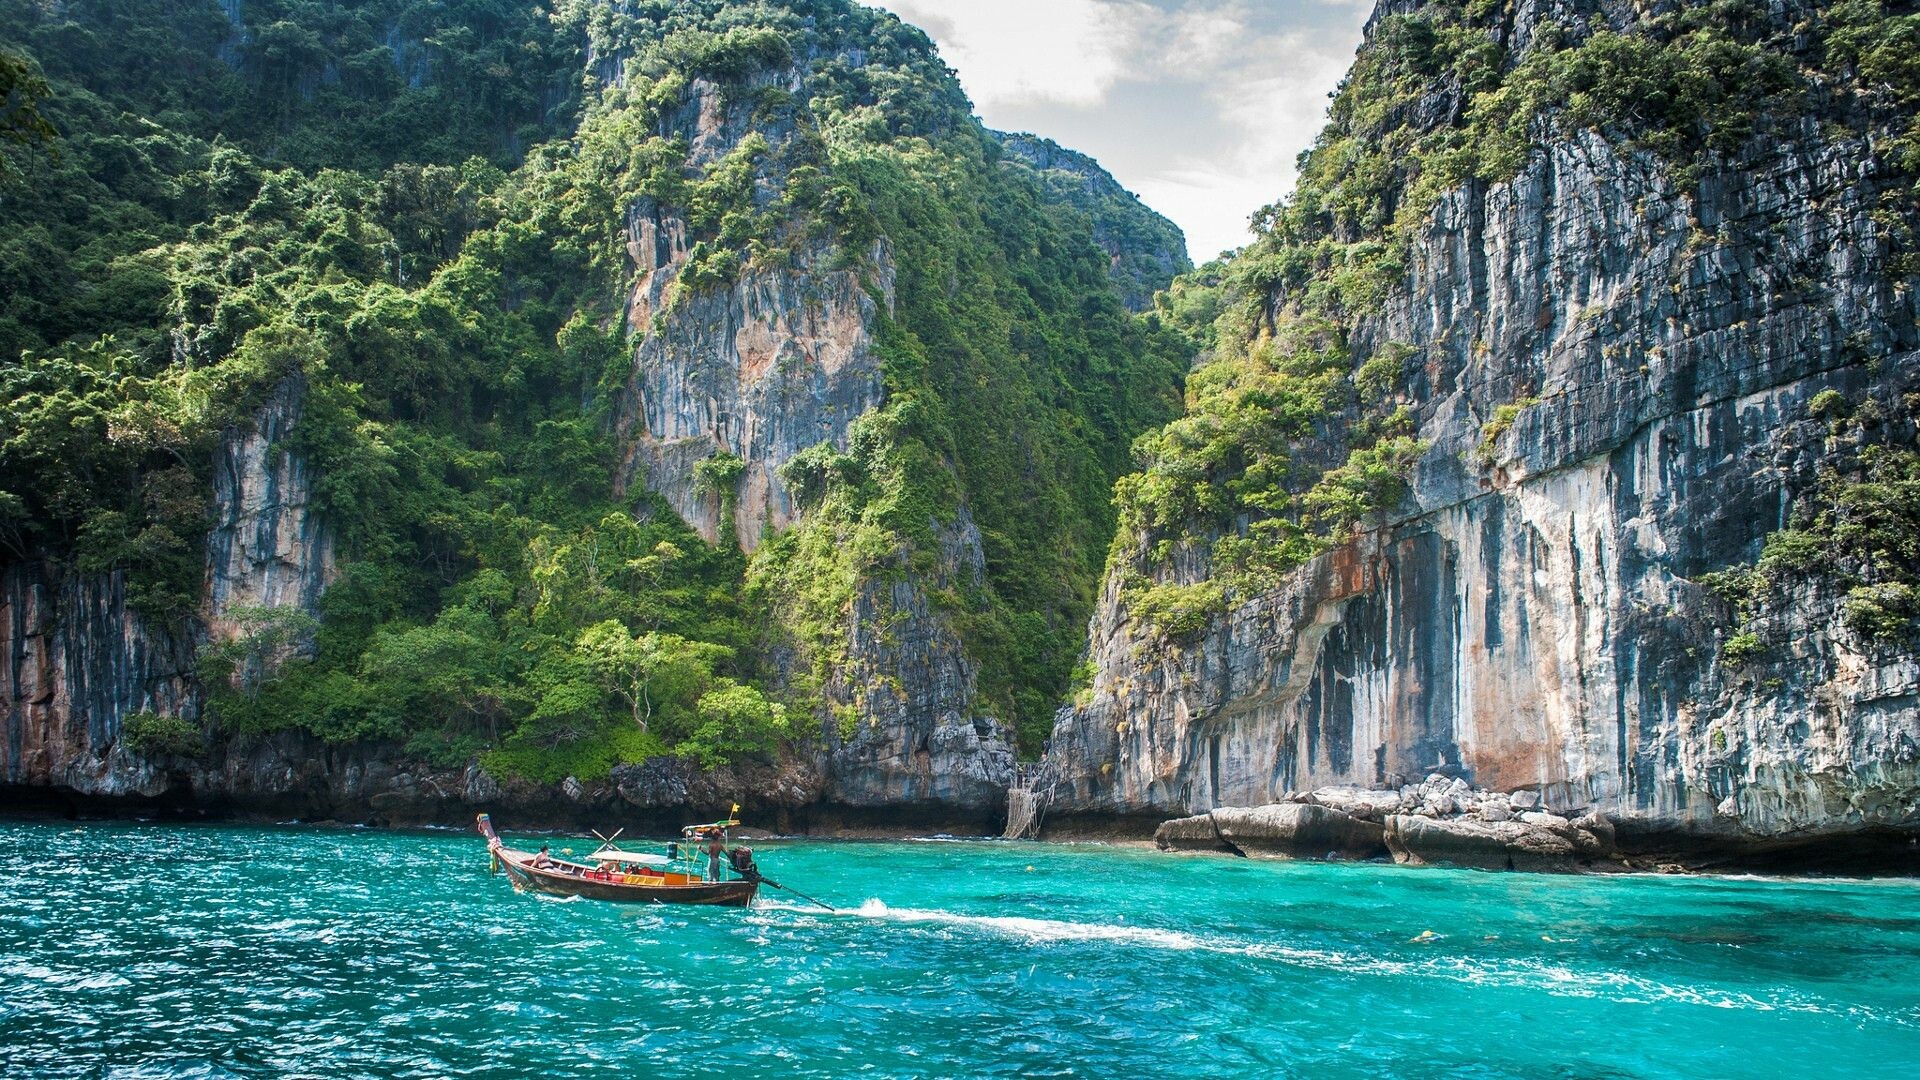 Phi Phi: The most pristine and well-preserved islands in Thailand, Natural landscape. 1920x1080 Full HD Wallpaper.